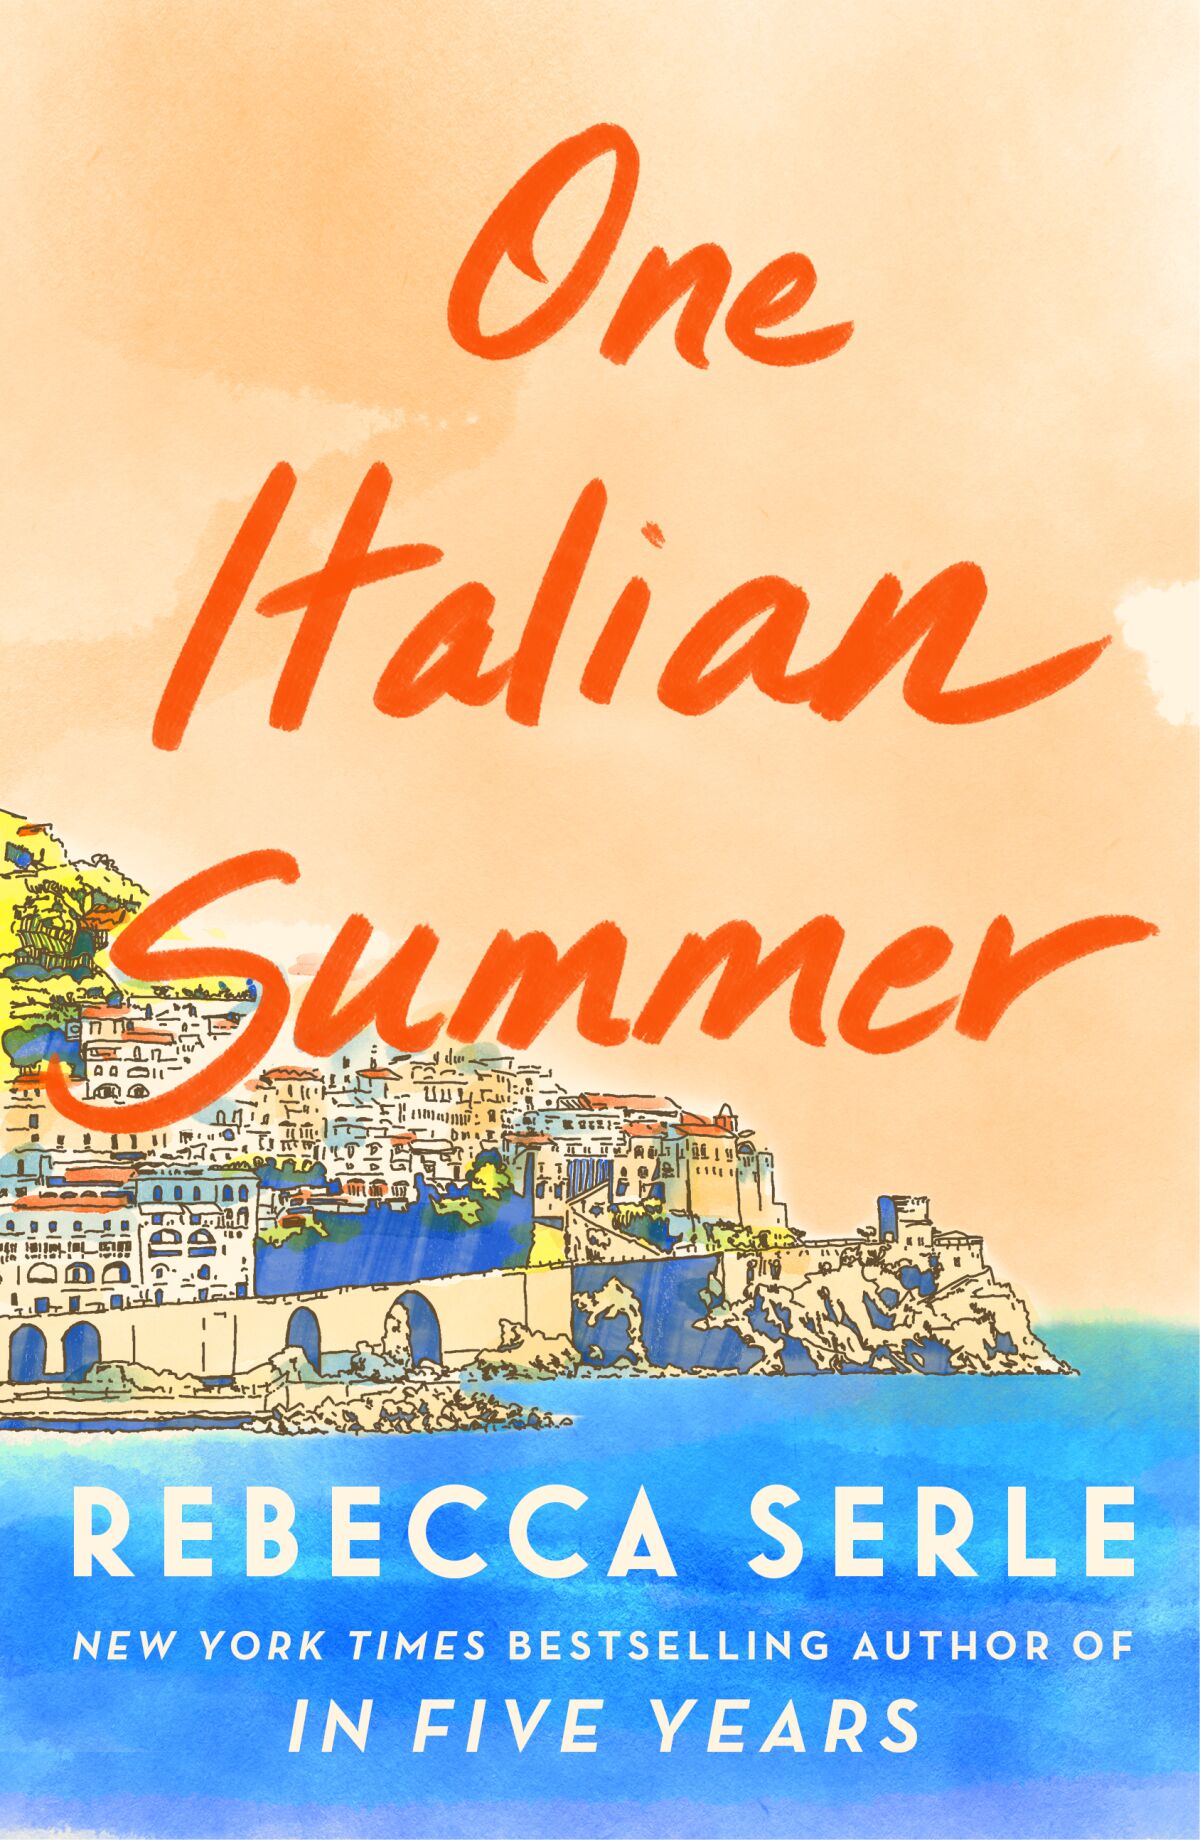 The cover of “One Italian Summer”